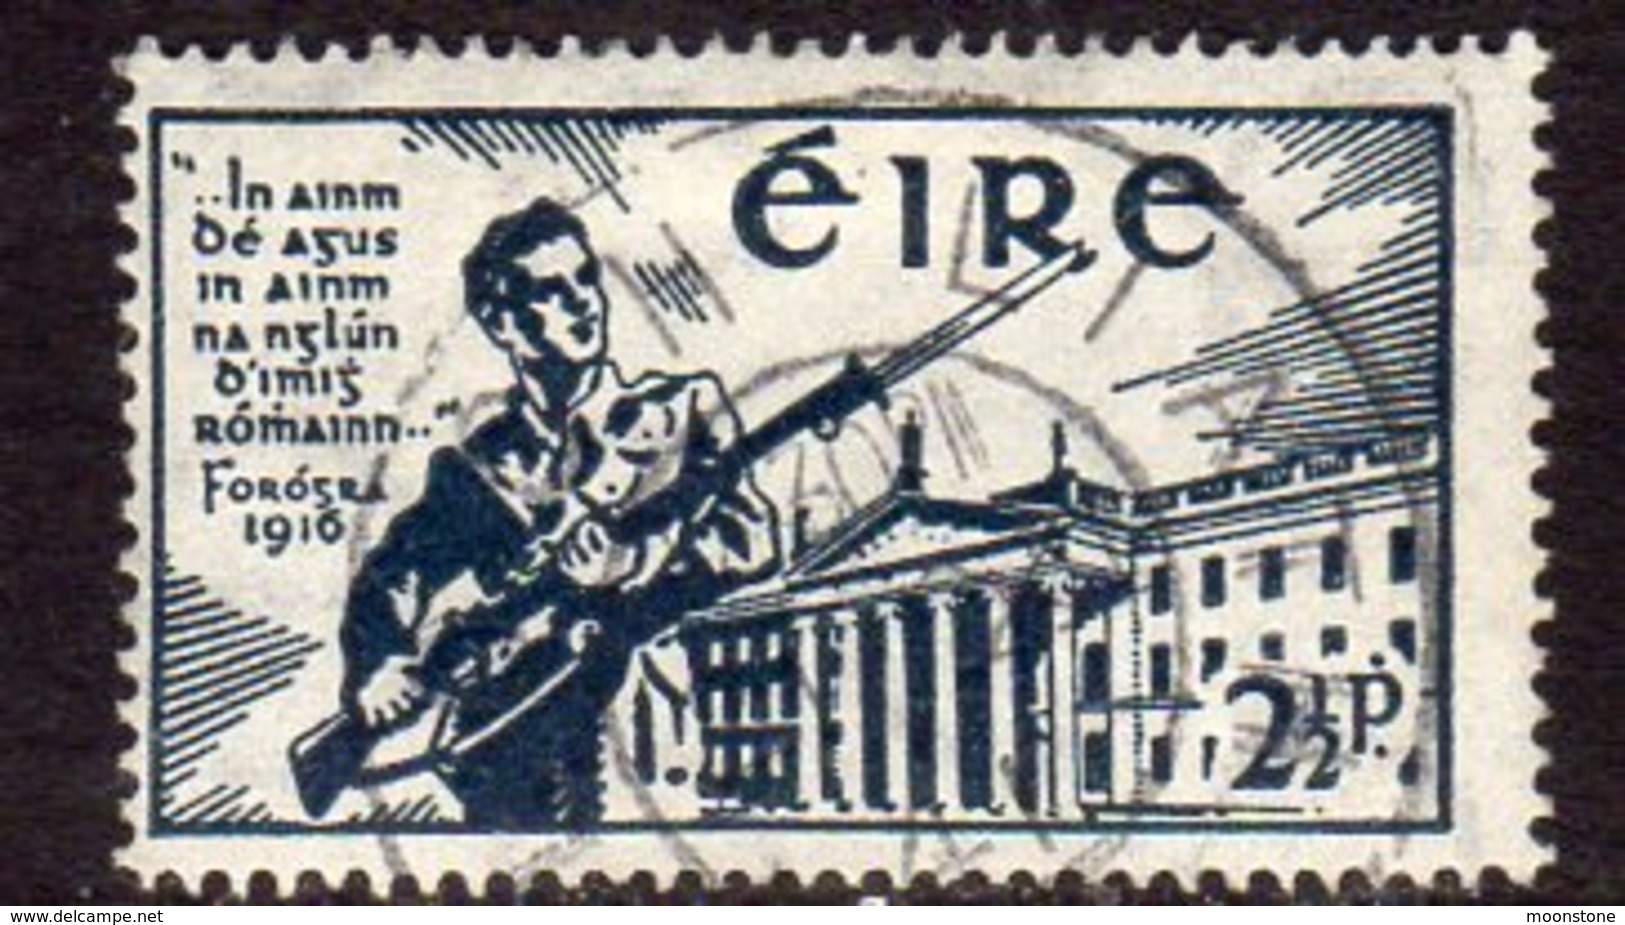 Ireland 1941 25th Anniversary Of The Easter Rising II, Used, SG 128 - Ungebraucht